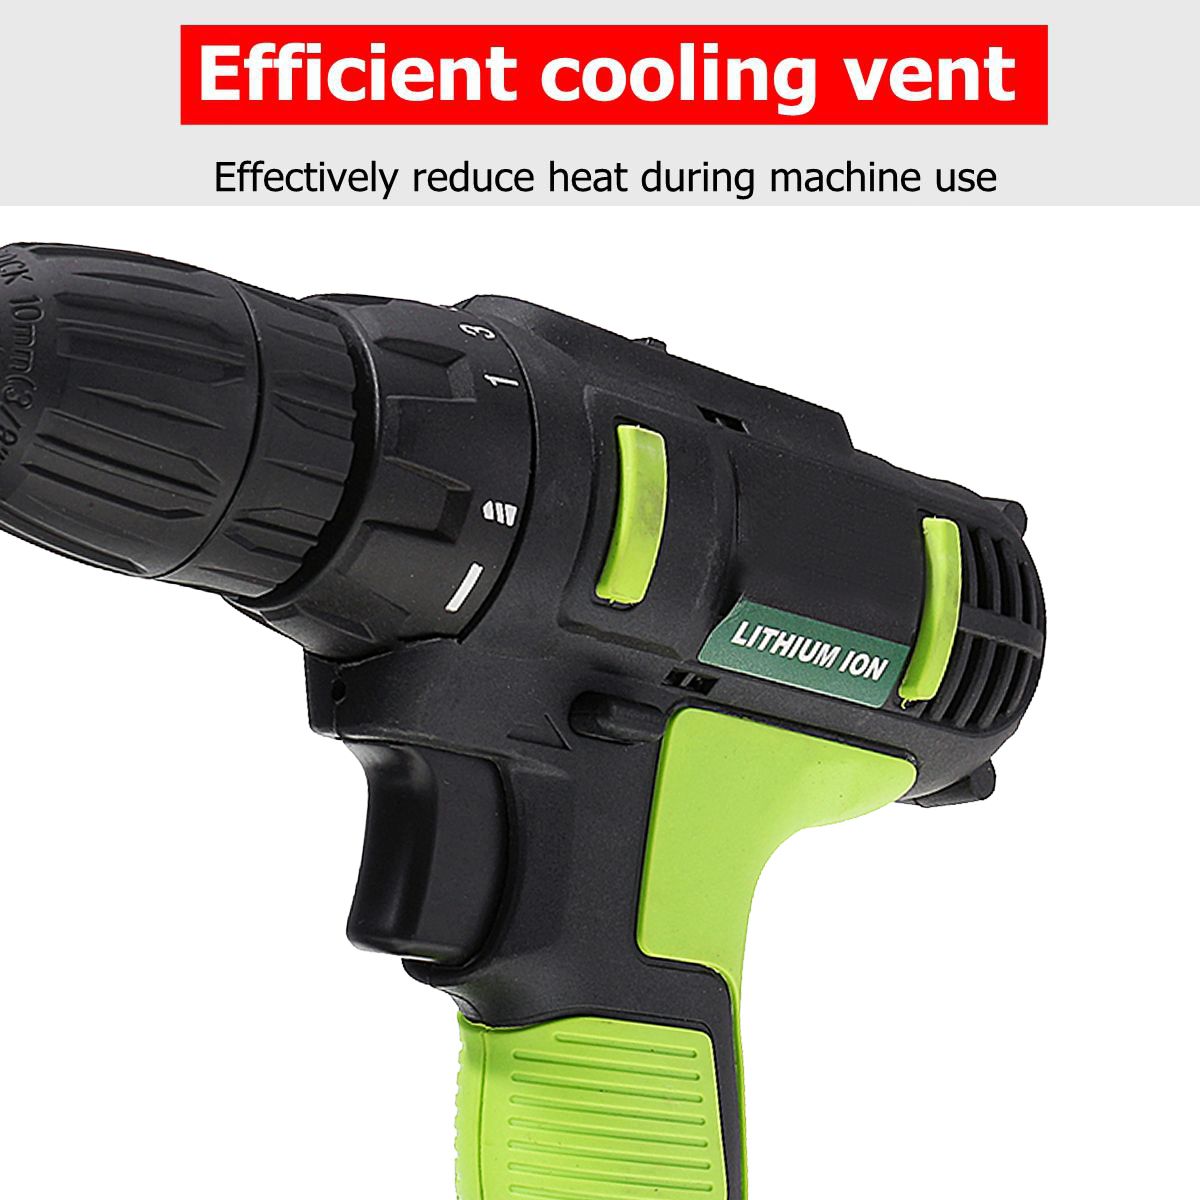 48VF-Cordless-Impact-Lithium-Electric-Drill-2-Speed-Electric-Hand-Drill-LED-lighting-12Pcs-Large-Cap-1555381